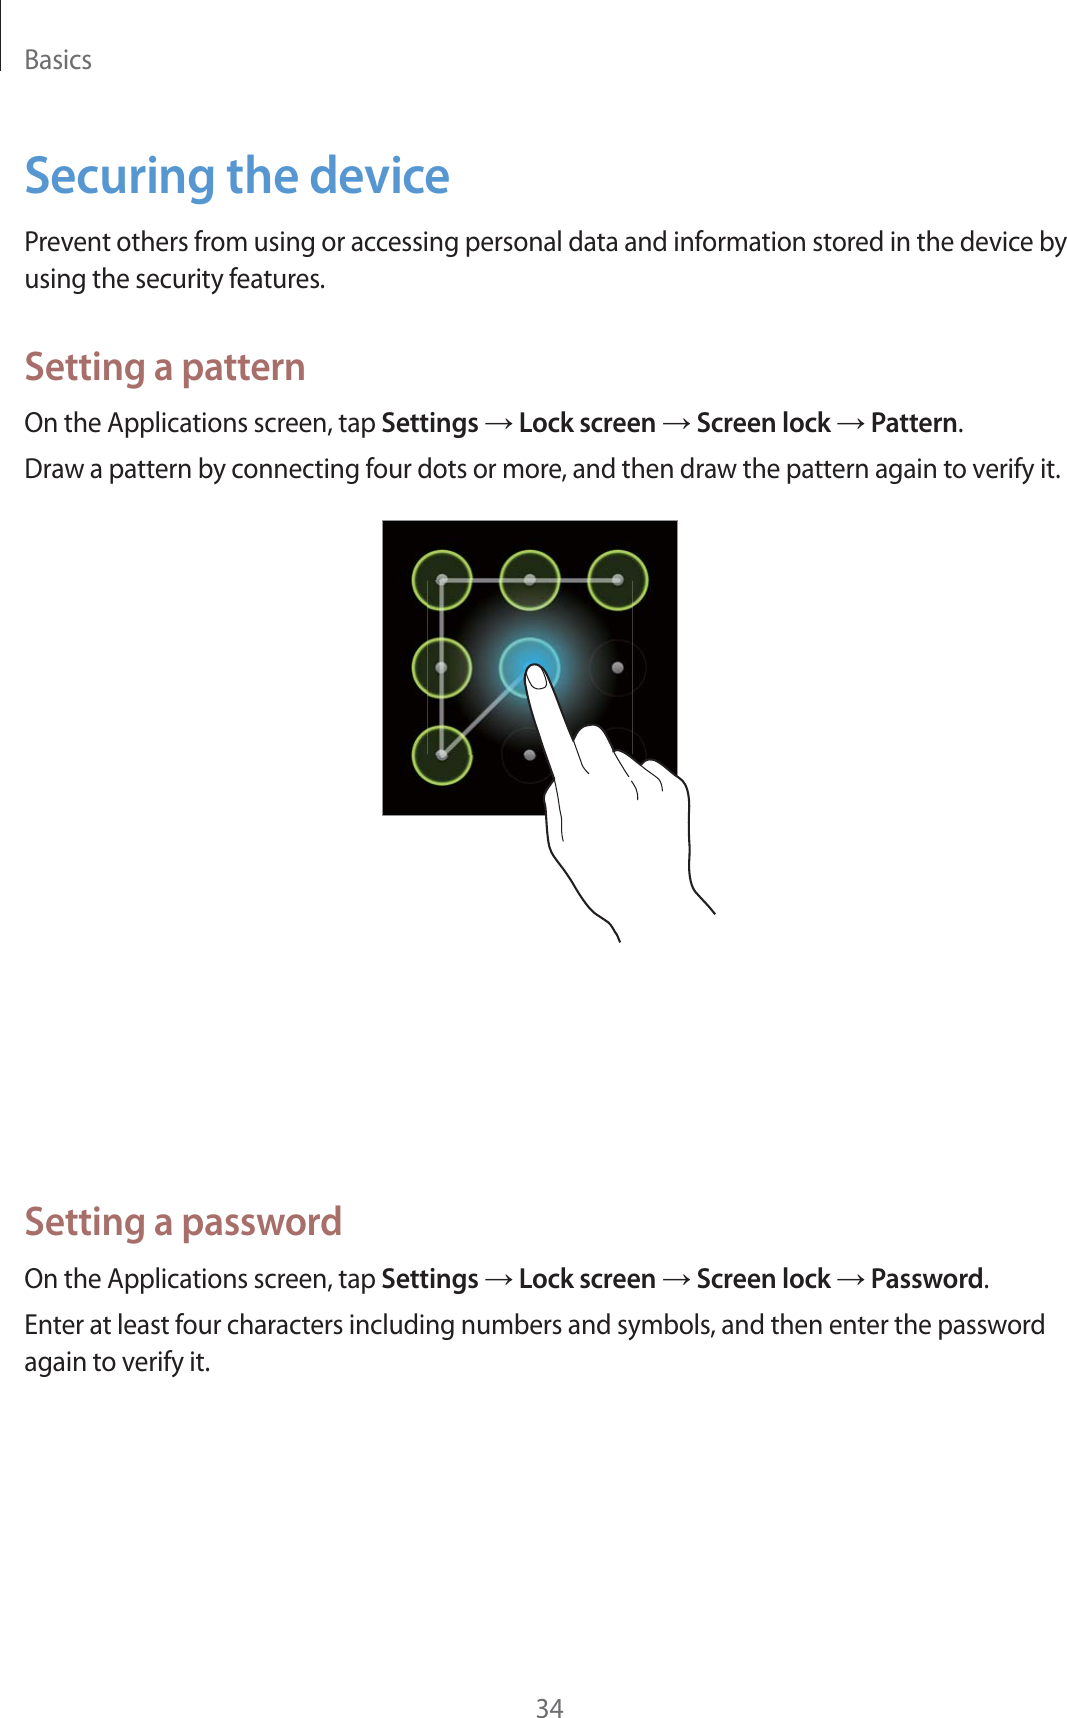 Basics34Securing the devicePrevent others from using or accessing personal data and information stored in the device by using the security features.Setting a patternOn the Applications screen, tap Settings ĺ Lock screen ĺ Screen lock ĺ Pattern.Draw a pattern by connecting four dots or more, and then draw the pattern again to verify it.Setting a PINOn the Applications screen, tap Settings ĺ Lock screen ĺ Screen lock ĺ PIN.Enter at least four numbers, and then enter the password again to verify it.Setting a passwordOn the Applications screen, tap Settings ĺ Lock screen ĺ Screen lock ĺ Password.Enter at least four characters including numbers and symbols, and then enter the password again to verify it.